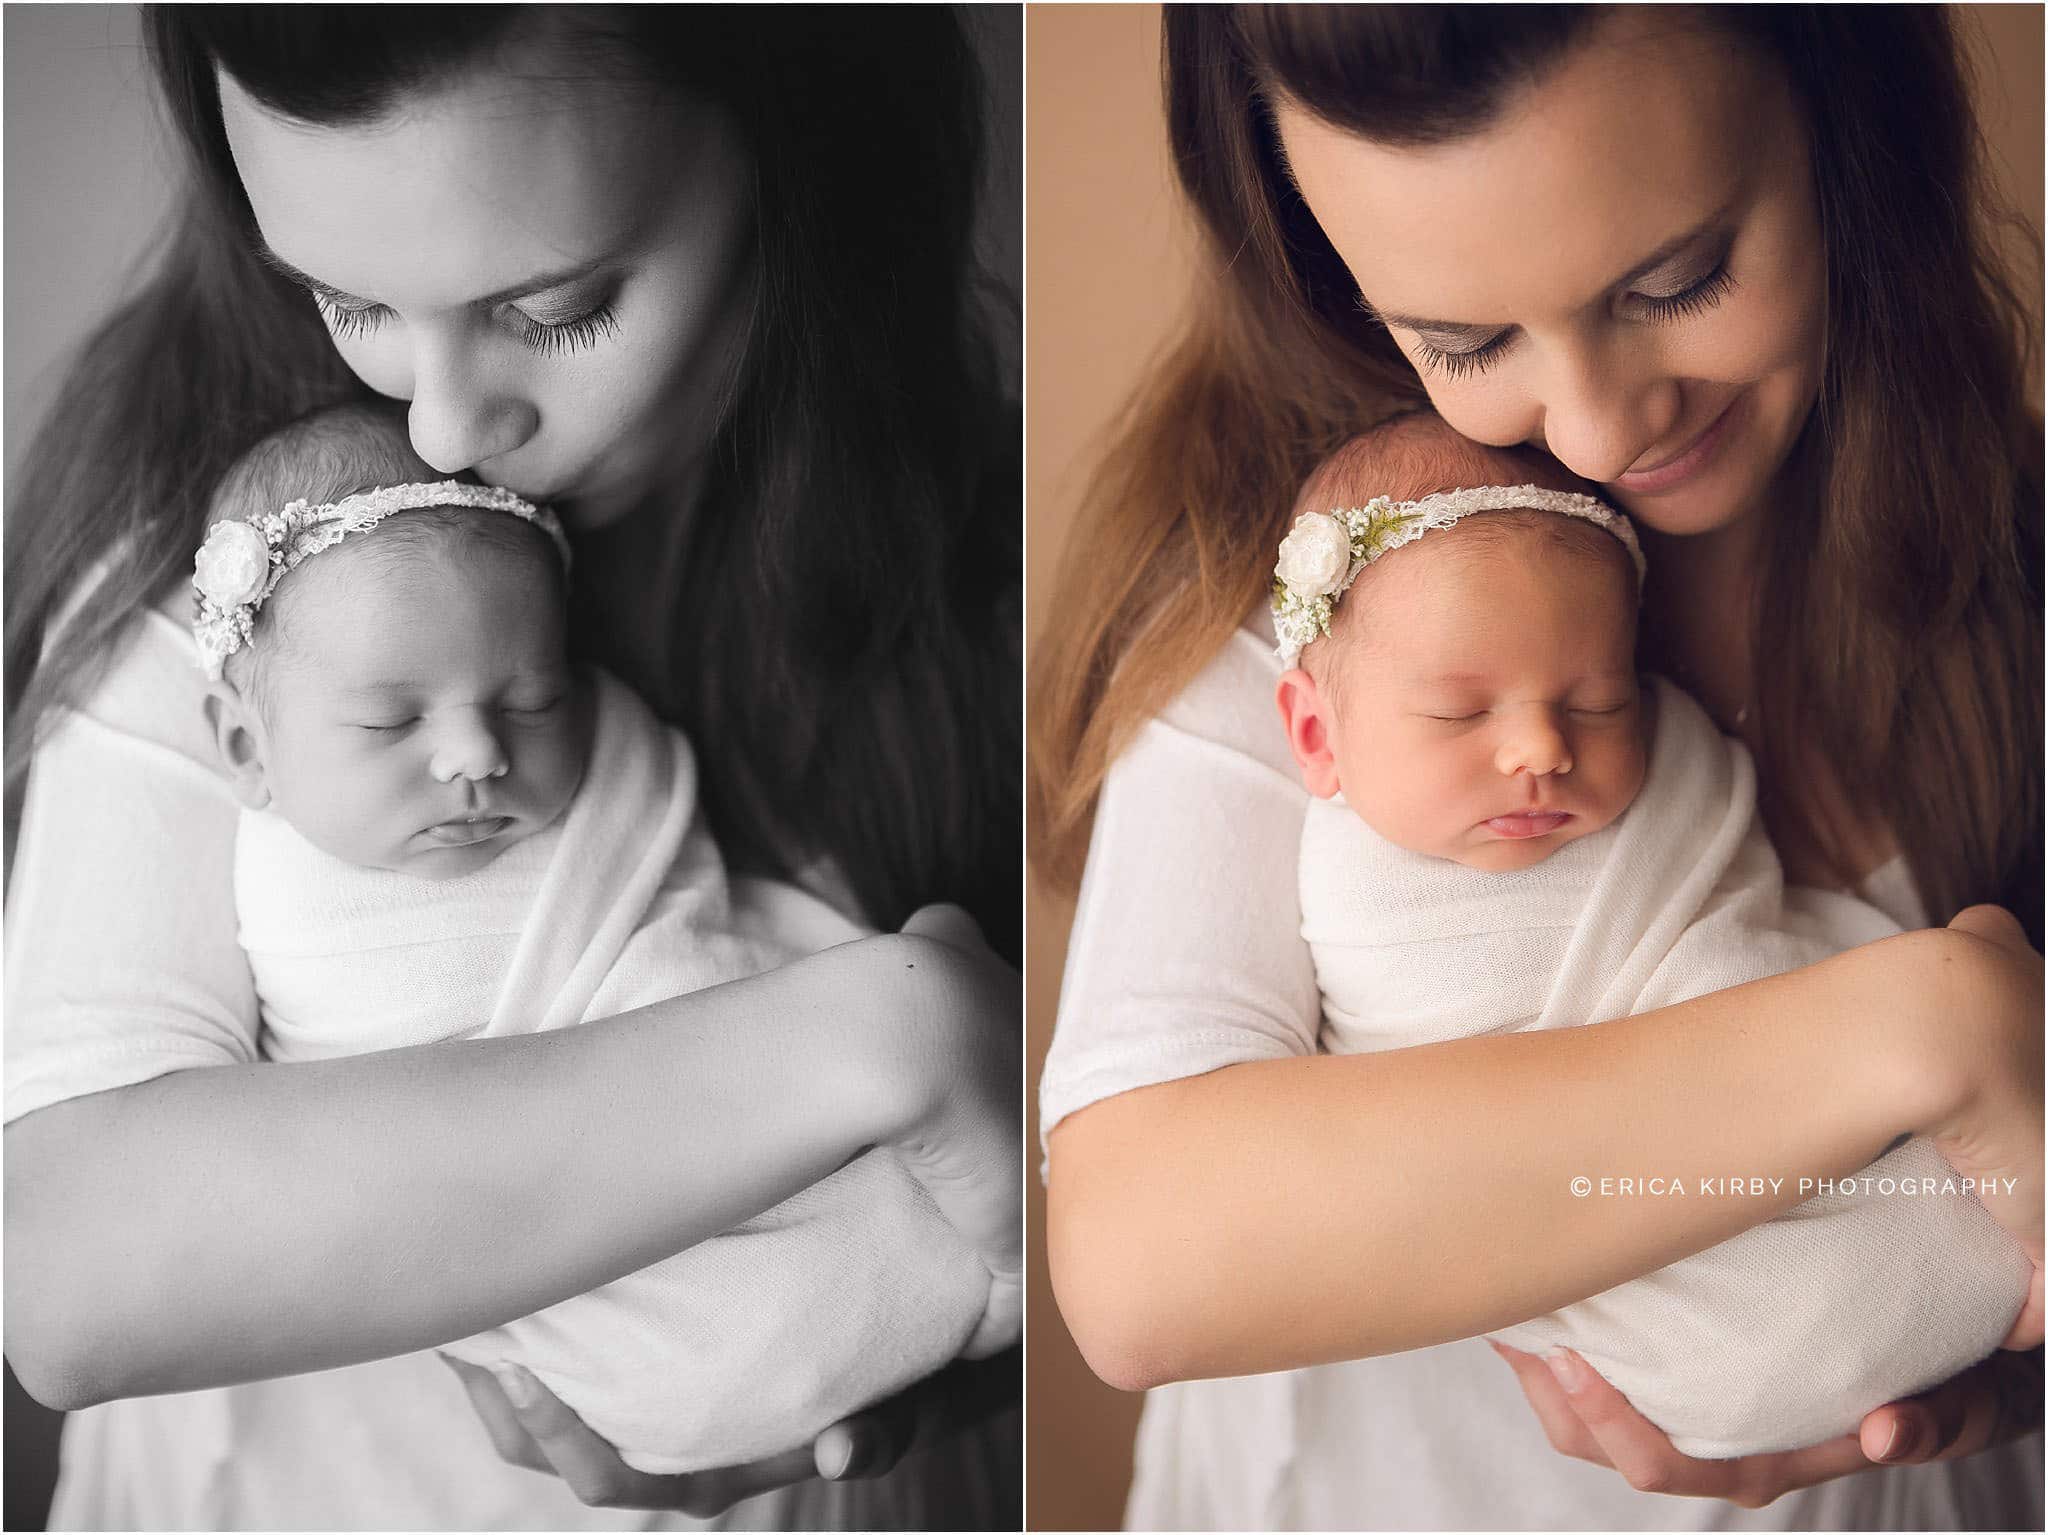 Newborn Photography Bentonville AR | Newborn Baby girl photography session in NWA  with soft colors and floral accents | Erica Kirby Photography